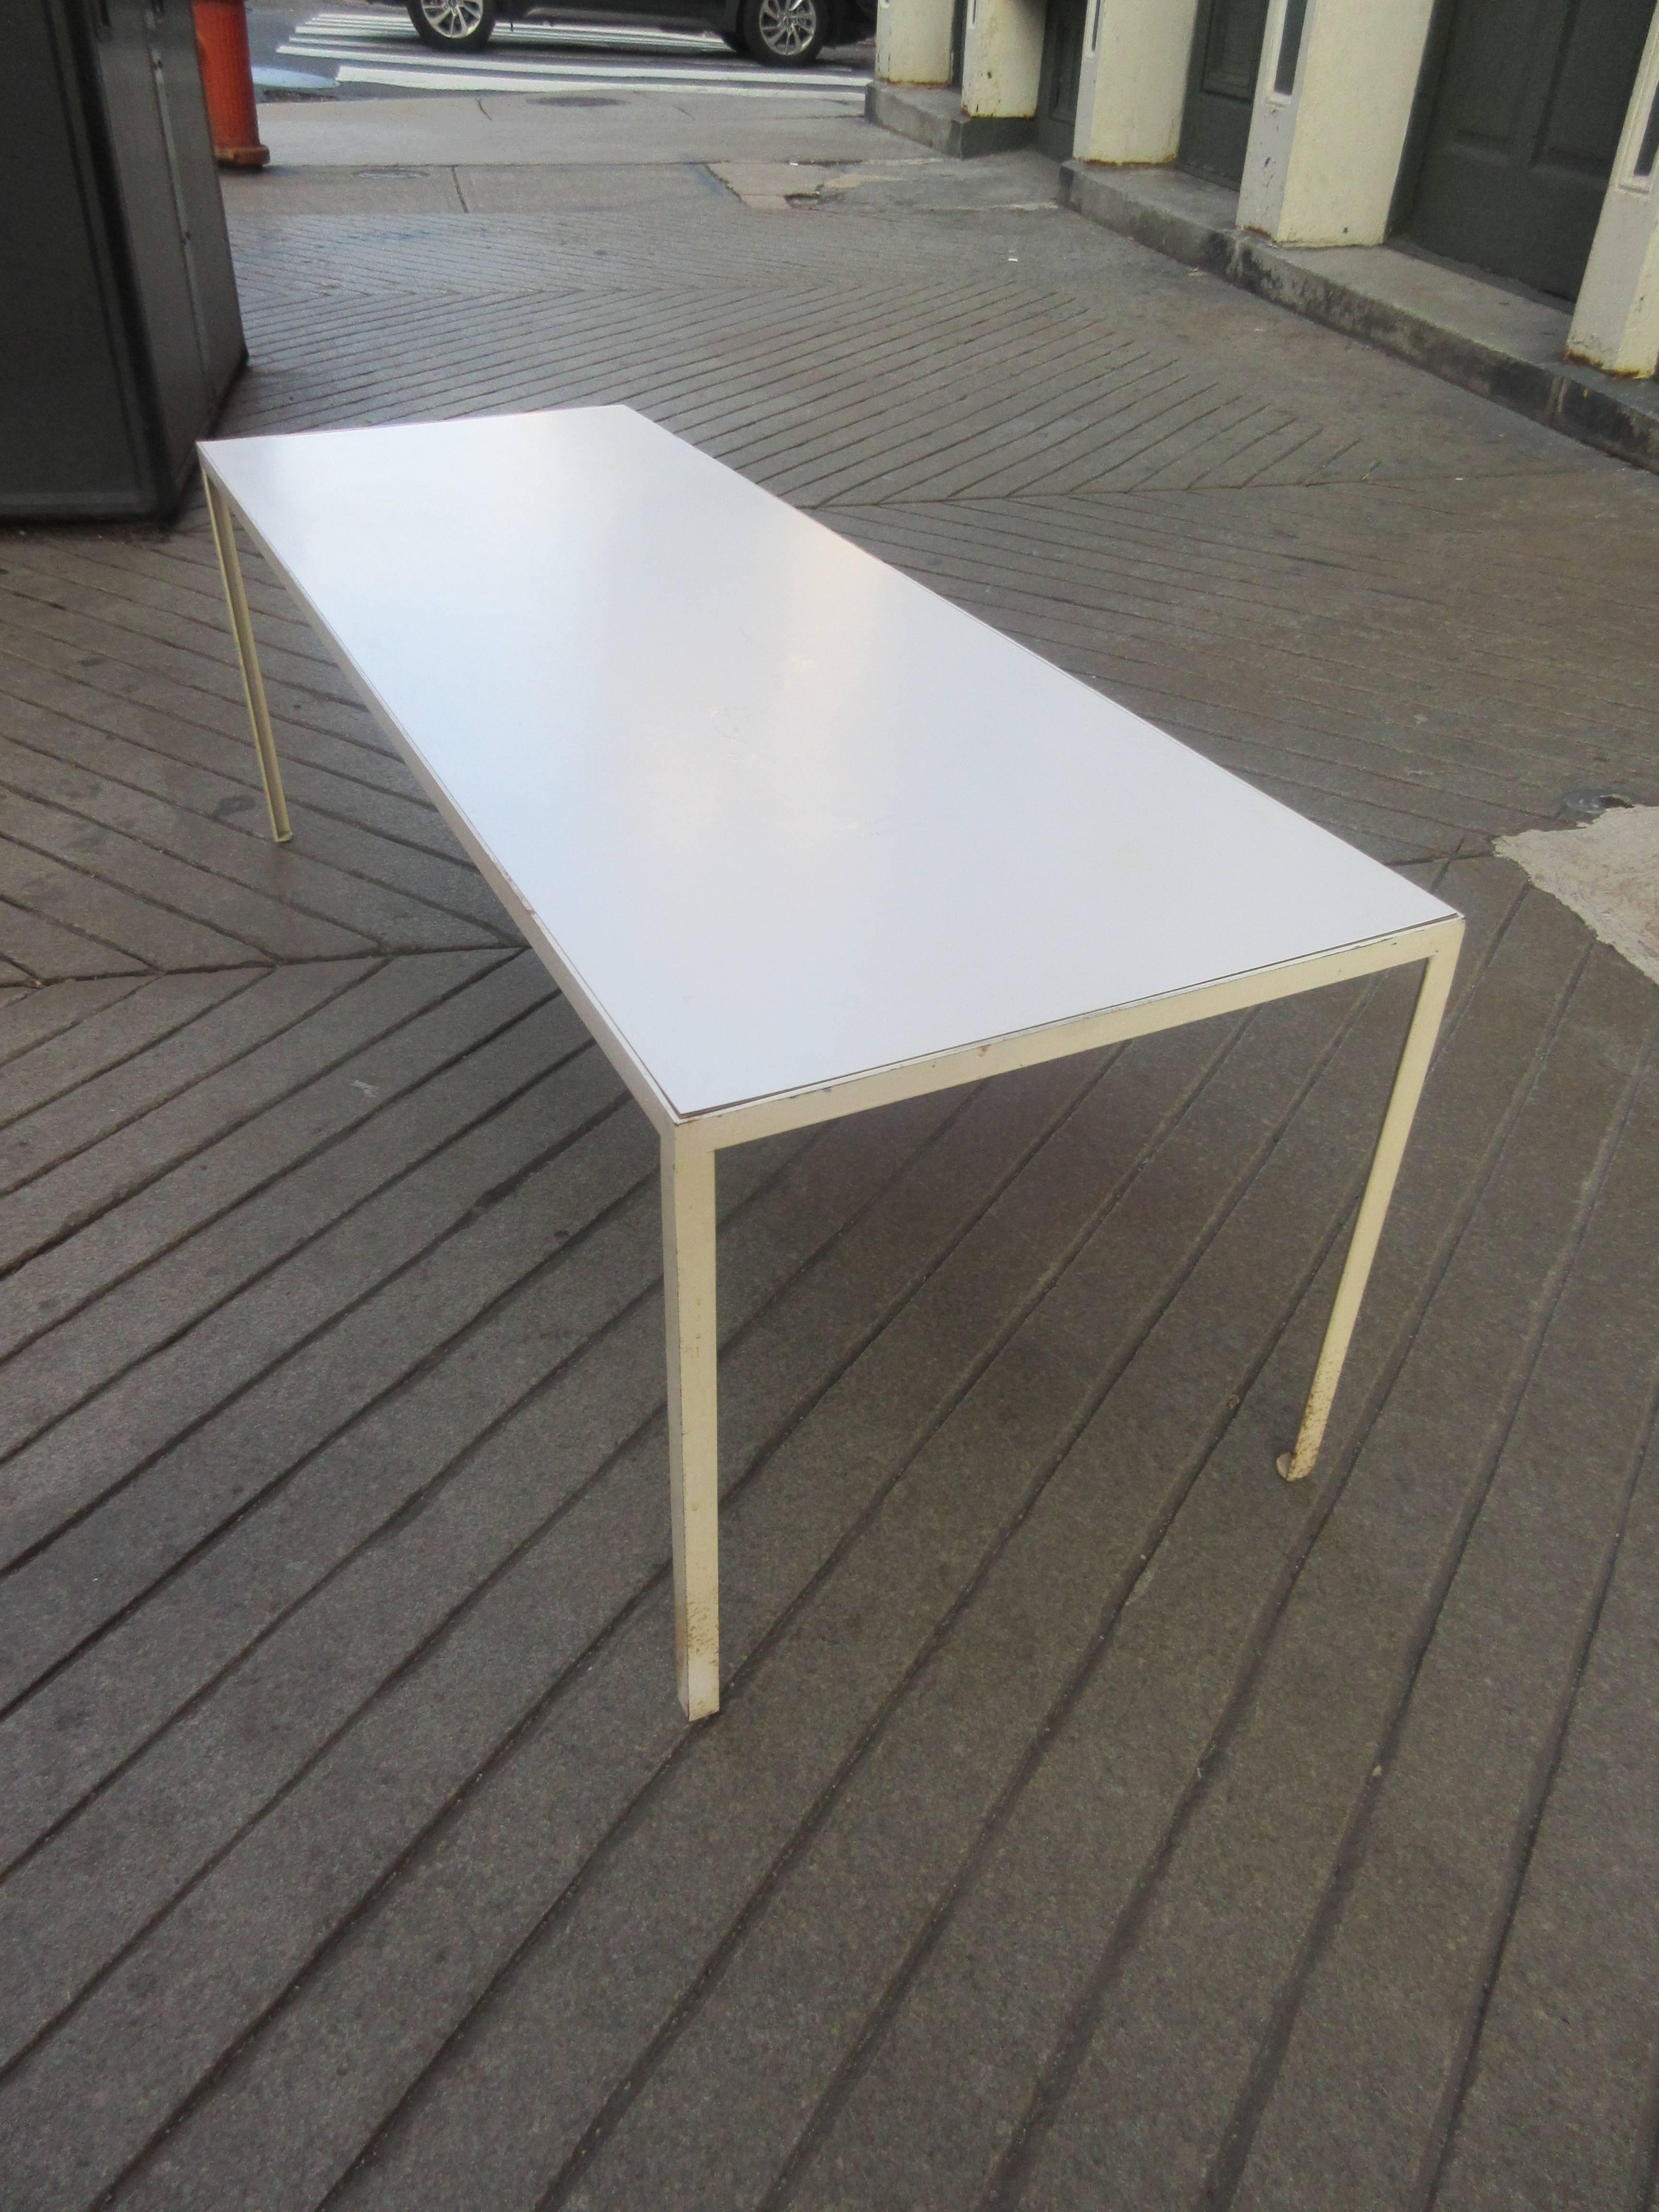 Classic George Nelson steelcase series coffee table. White painted iron frame with white Formica top. Retains original foil label! All original!